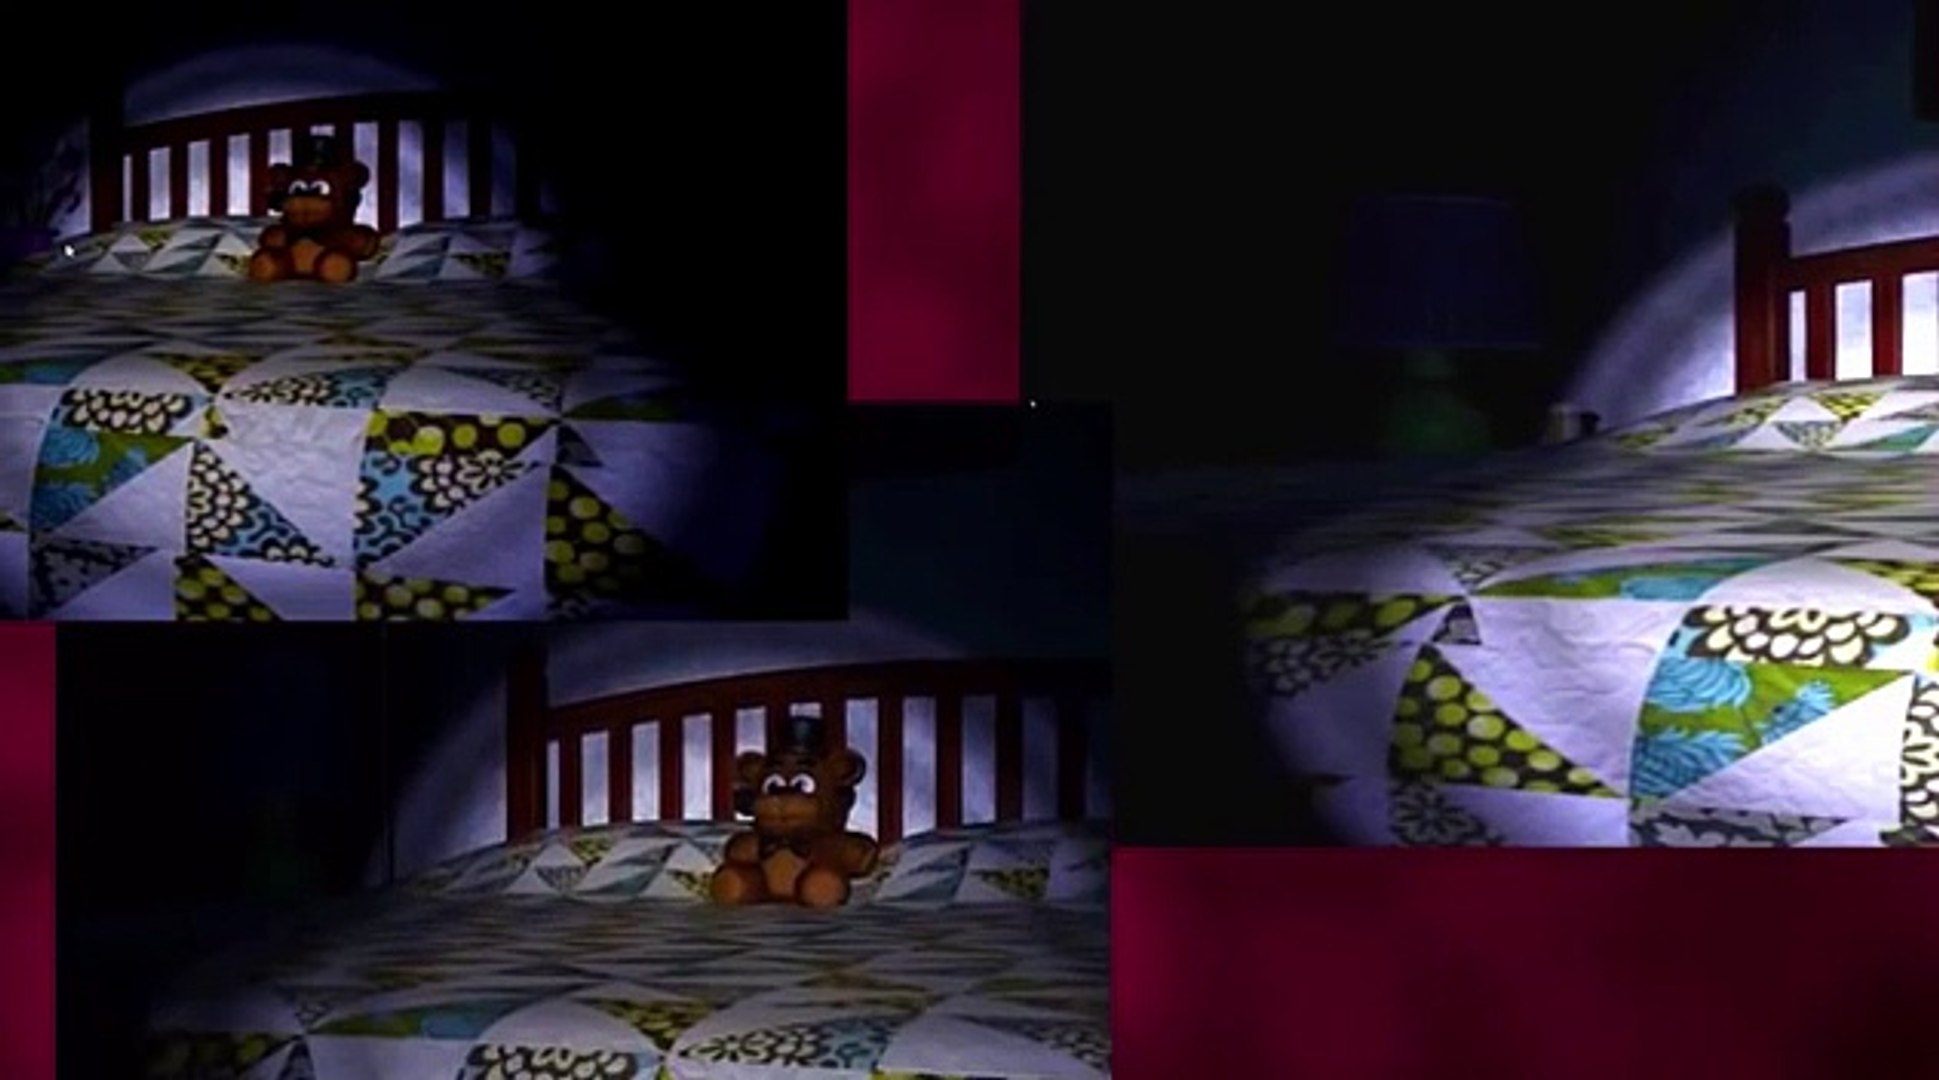 Top 10 Five Nights At Freddy's Easter Eggs